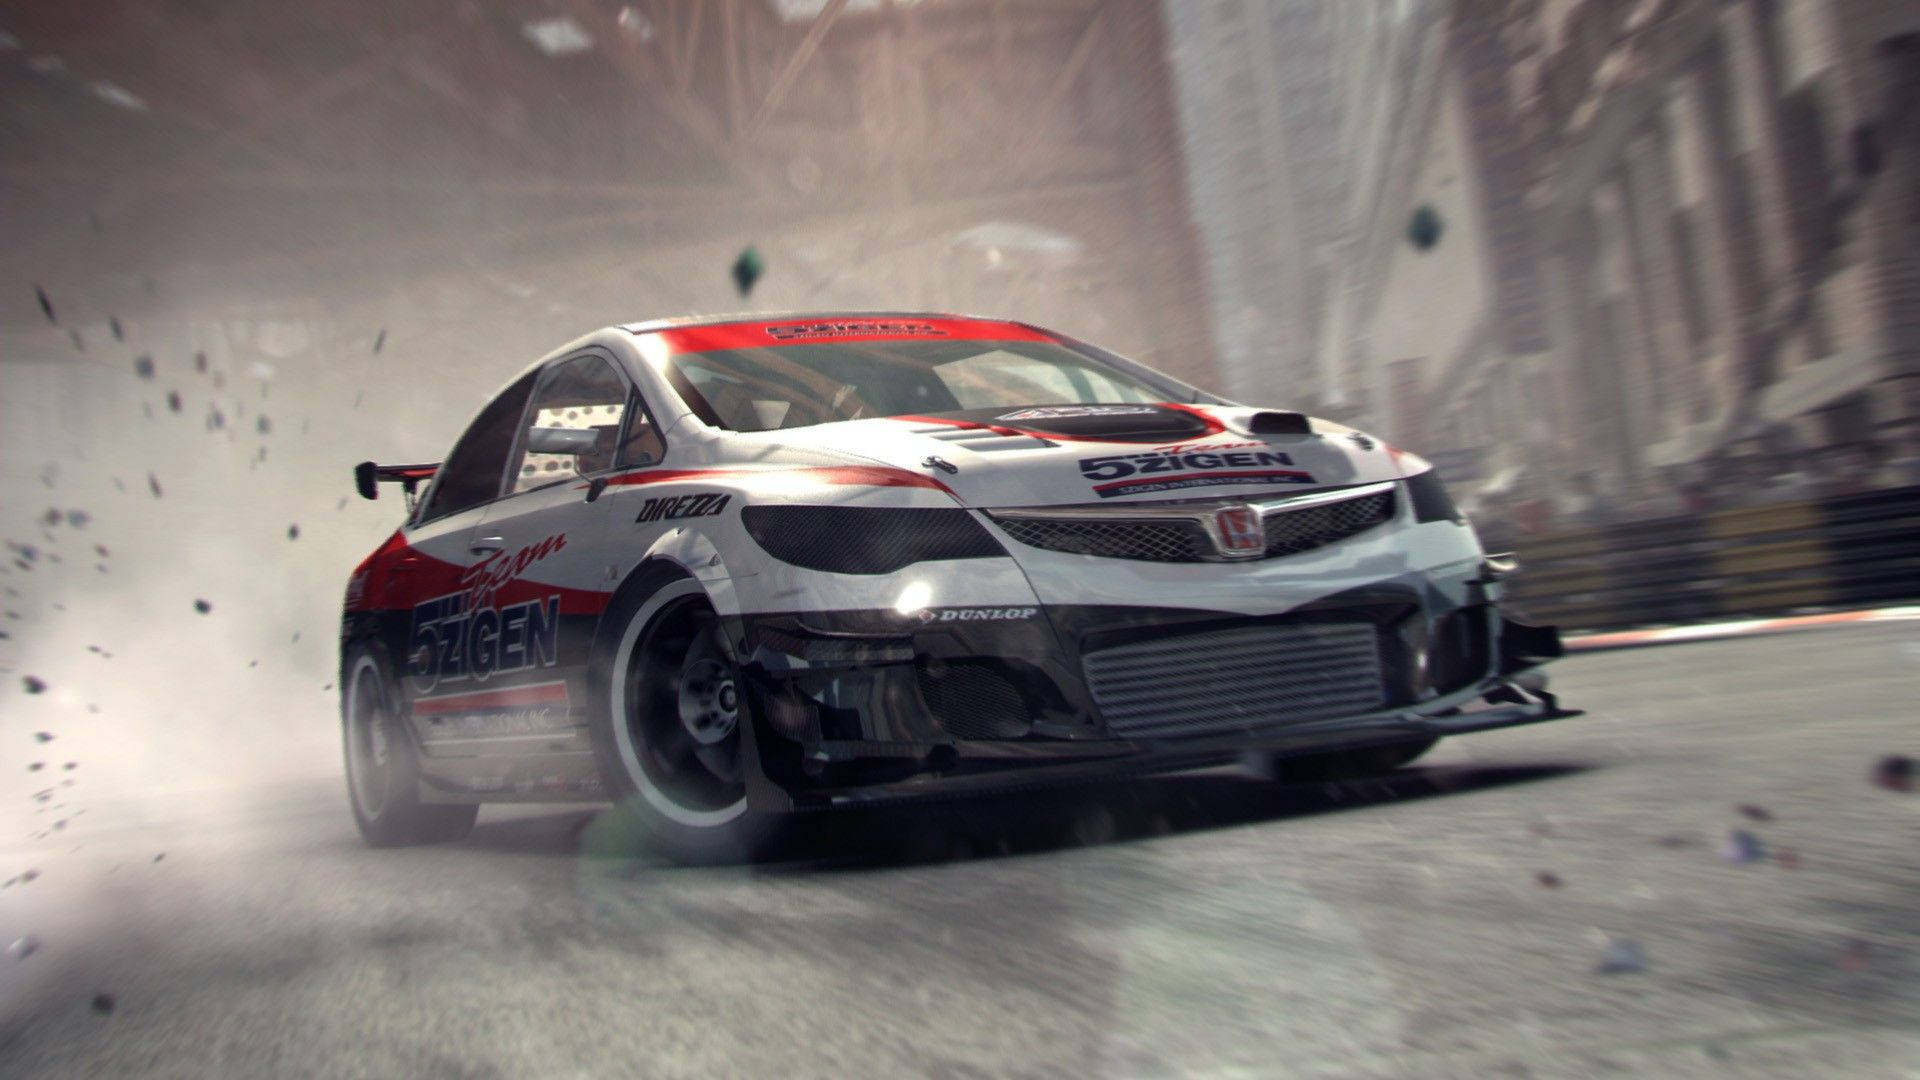 Stylized Speed - Grid 2 Featured Car